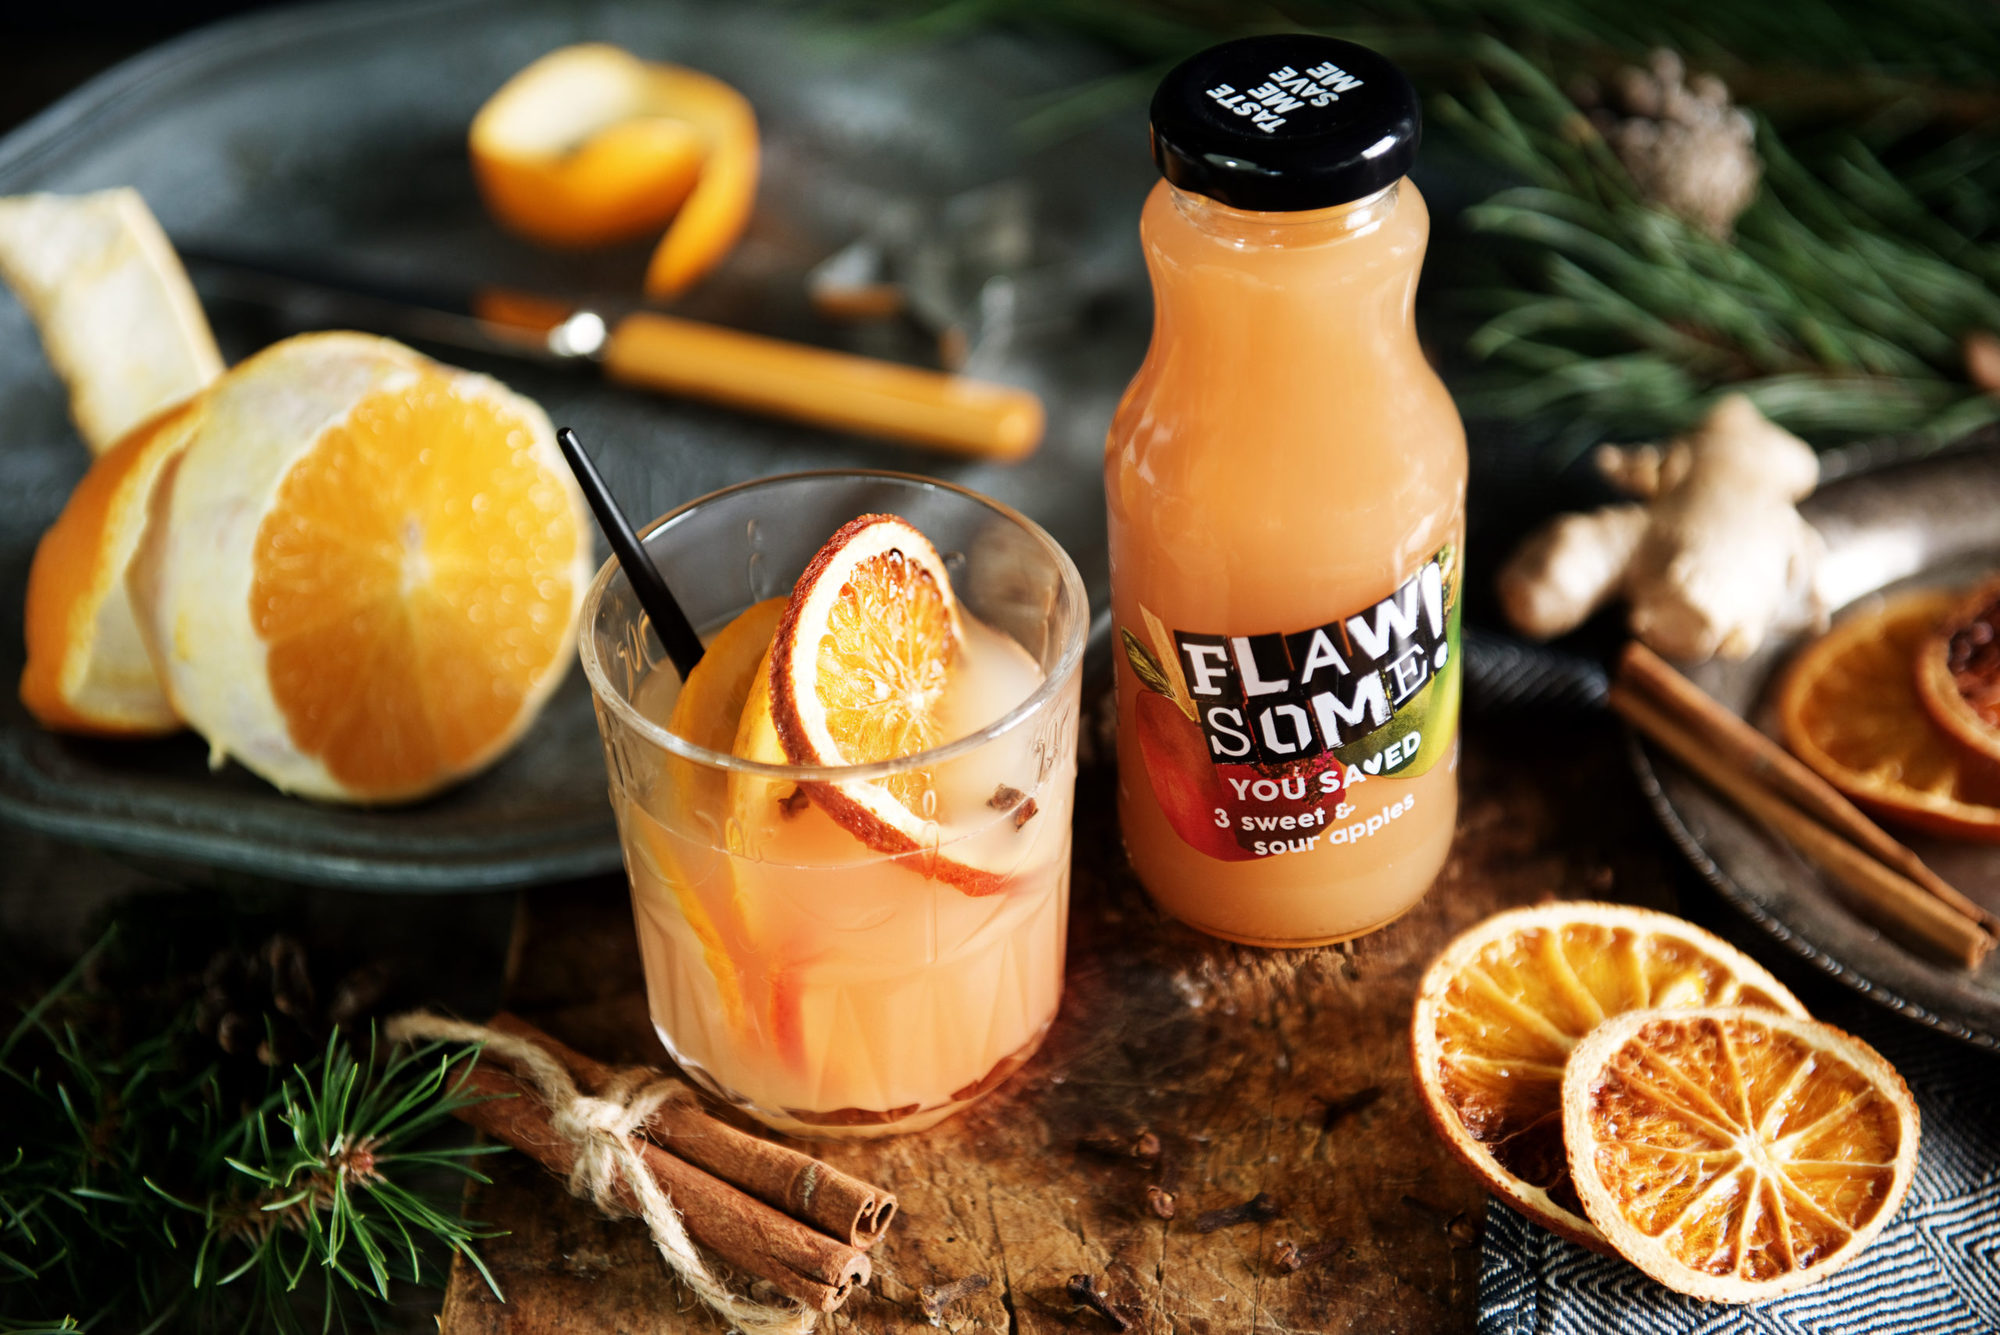 A glass of Spiced Apple Warmer with a glass bottle of Flawsome! Drinks apple juice surrounded by orange slices and cinnamon sticks.